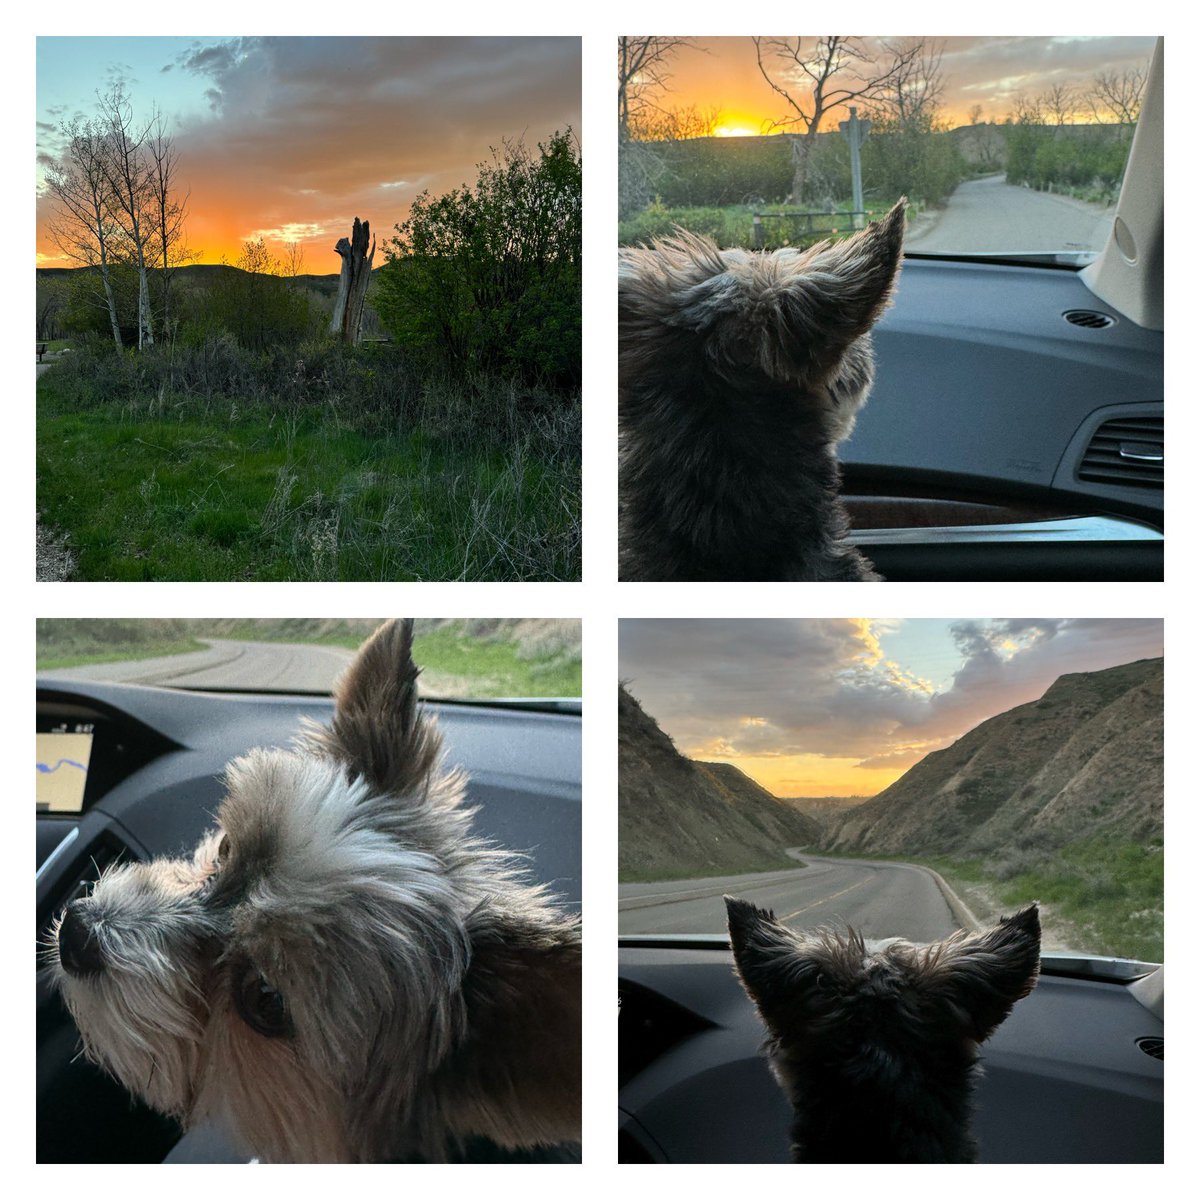 Gio. Happy Monday morning. Last was spectacular watching the sun set by the river 🫶🏼🥰💕💙#beautifulsunset #MondayMorning